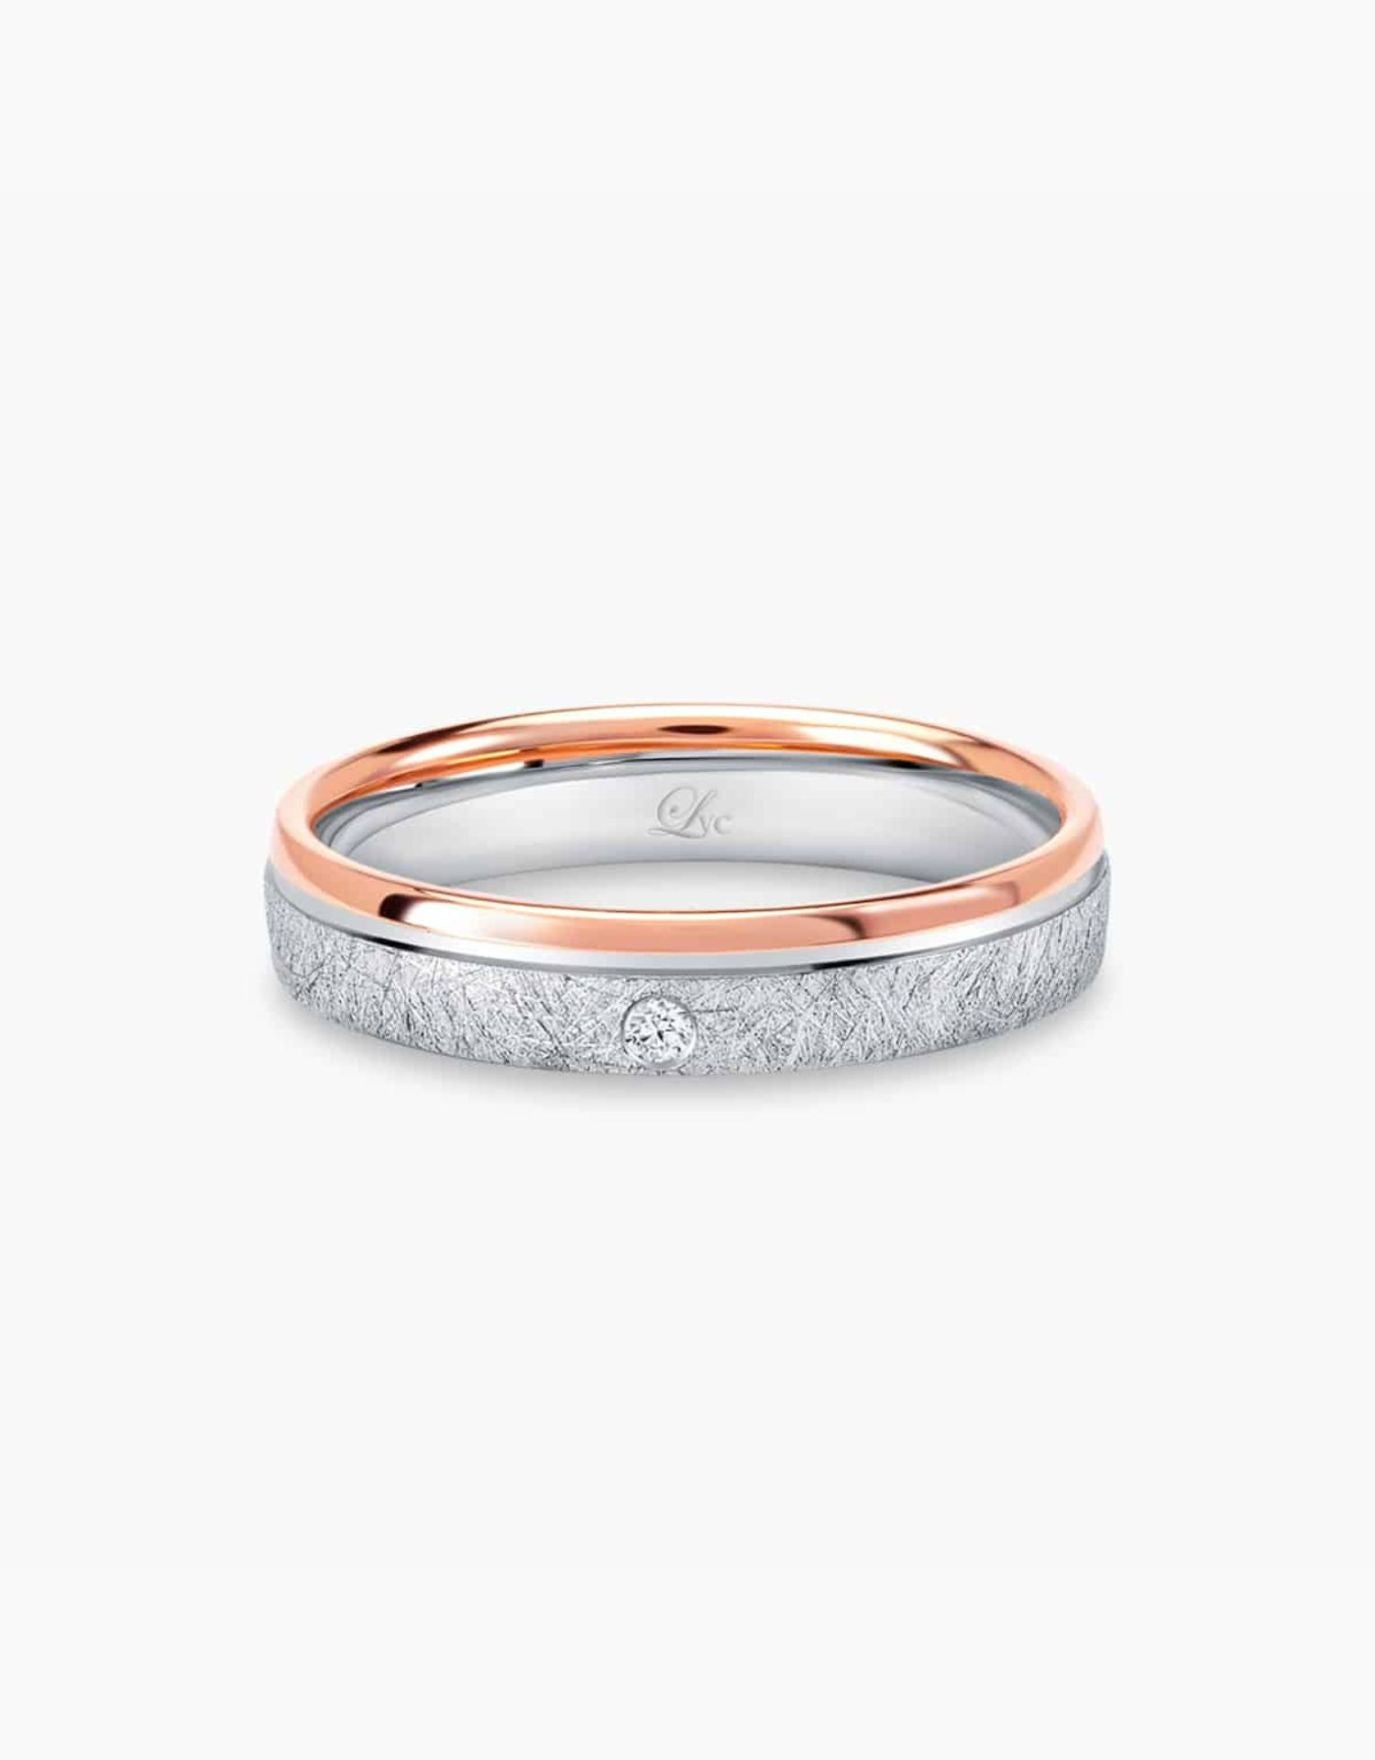 LVC Soleil Wedding Band in Dual Matte and Glossy Finish with Diamond